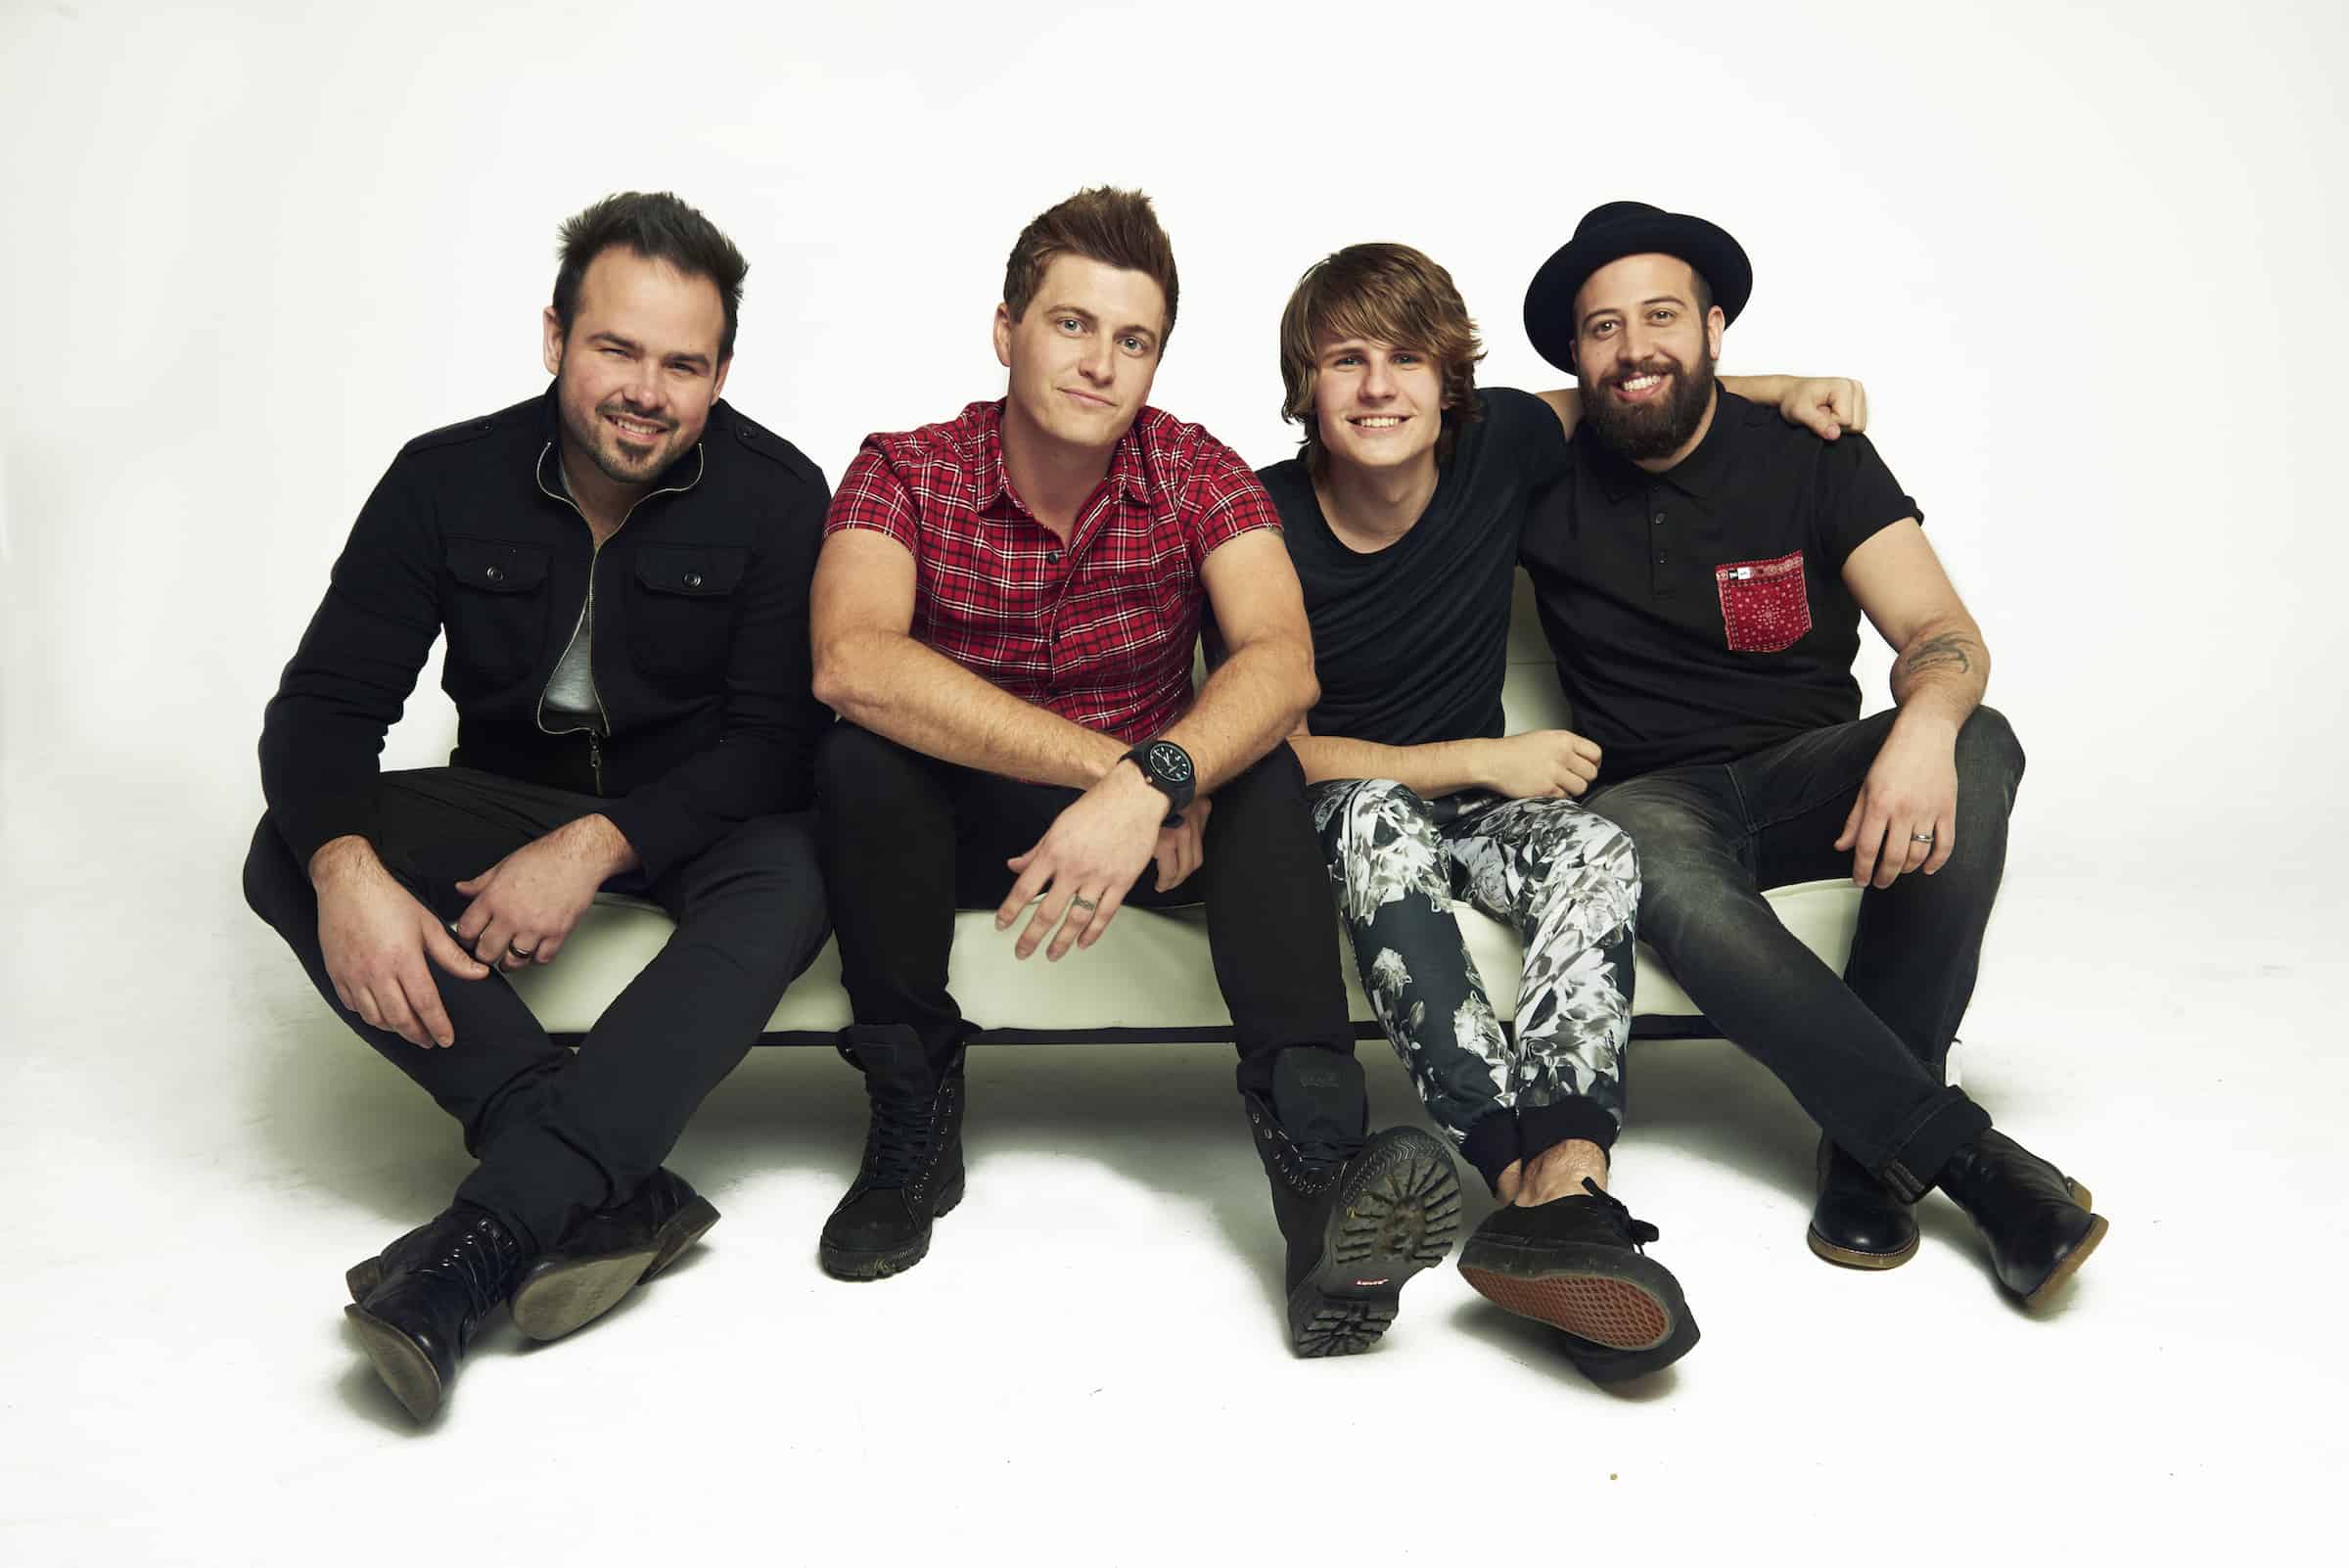 NEWS: Baseball Fans “Move” With Audio Adrenaline